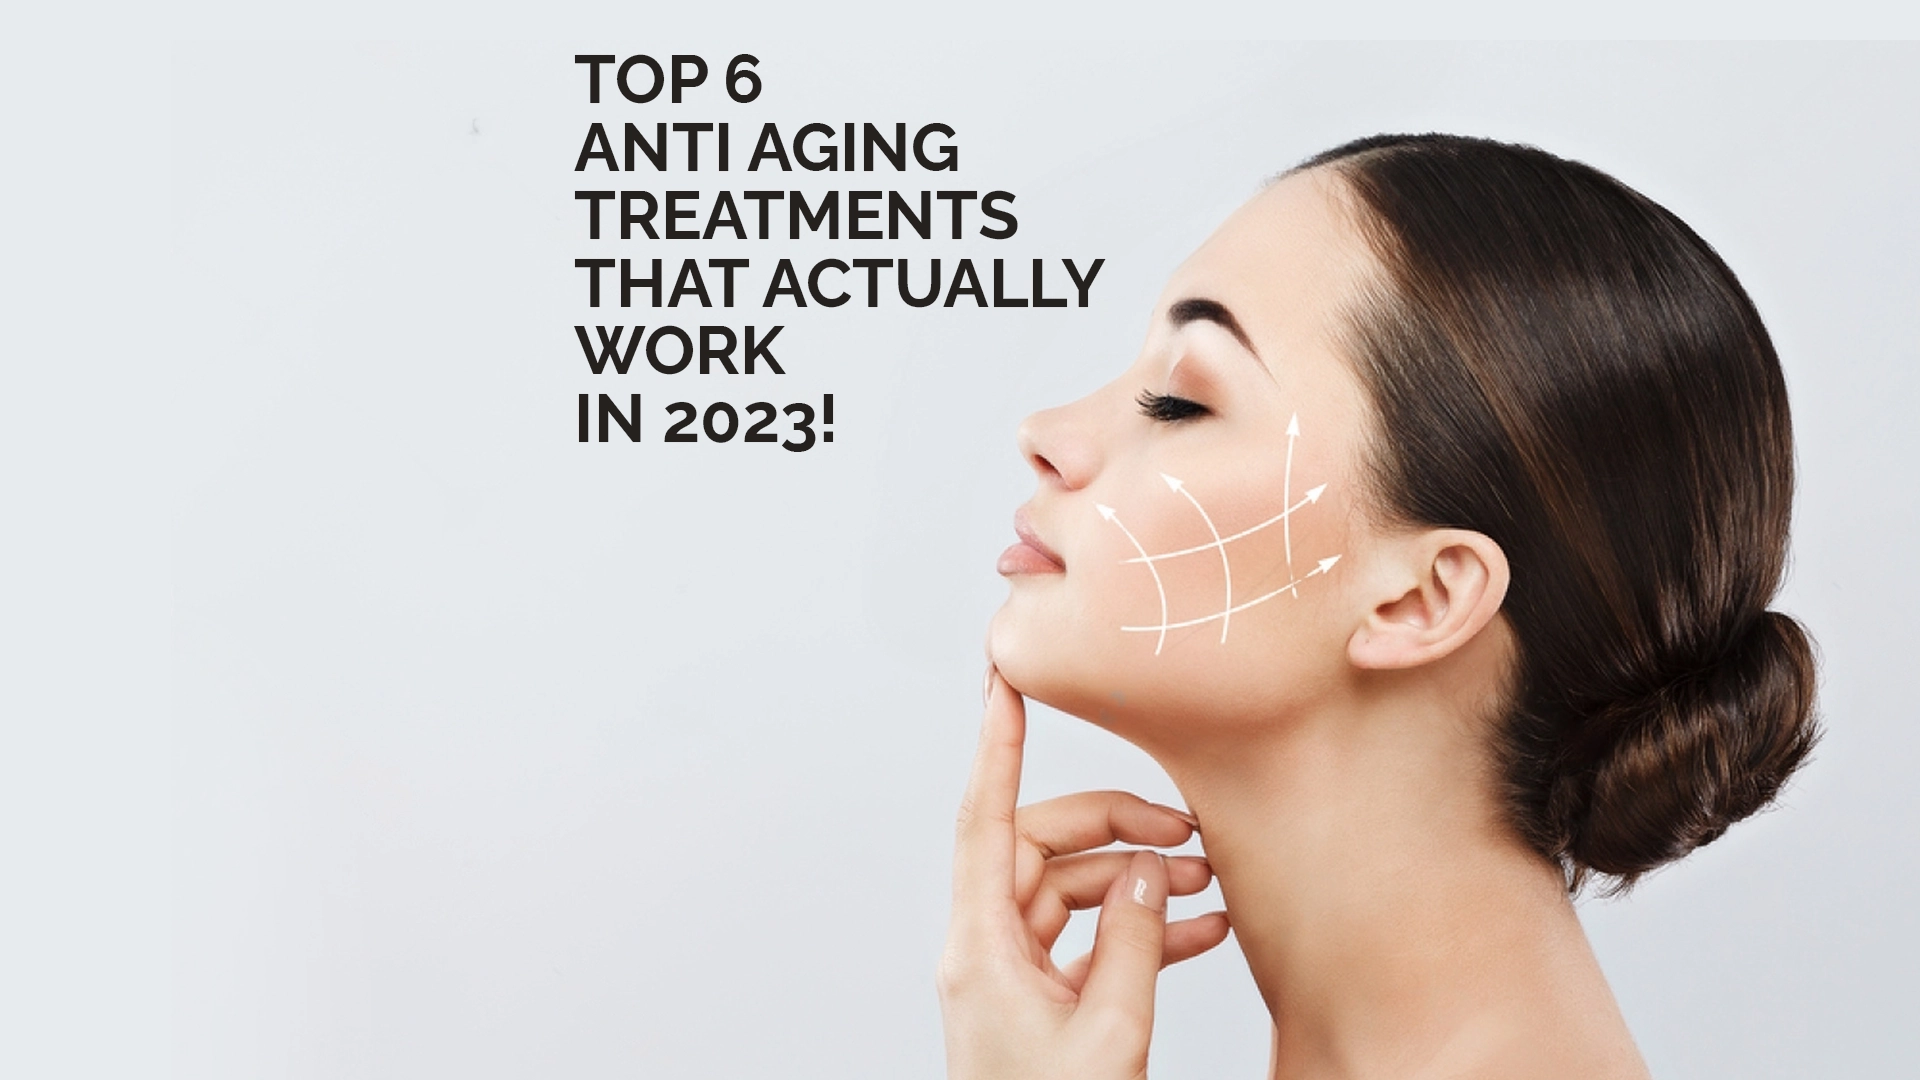 Top 6 Anti Aging treatments That Actually Work in 2023!